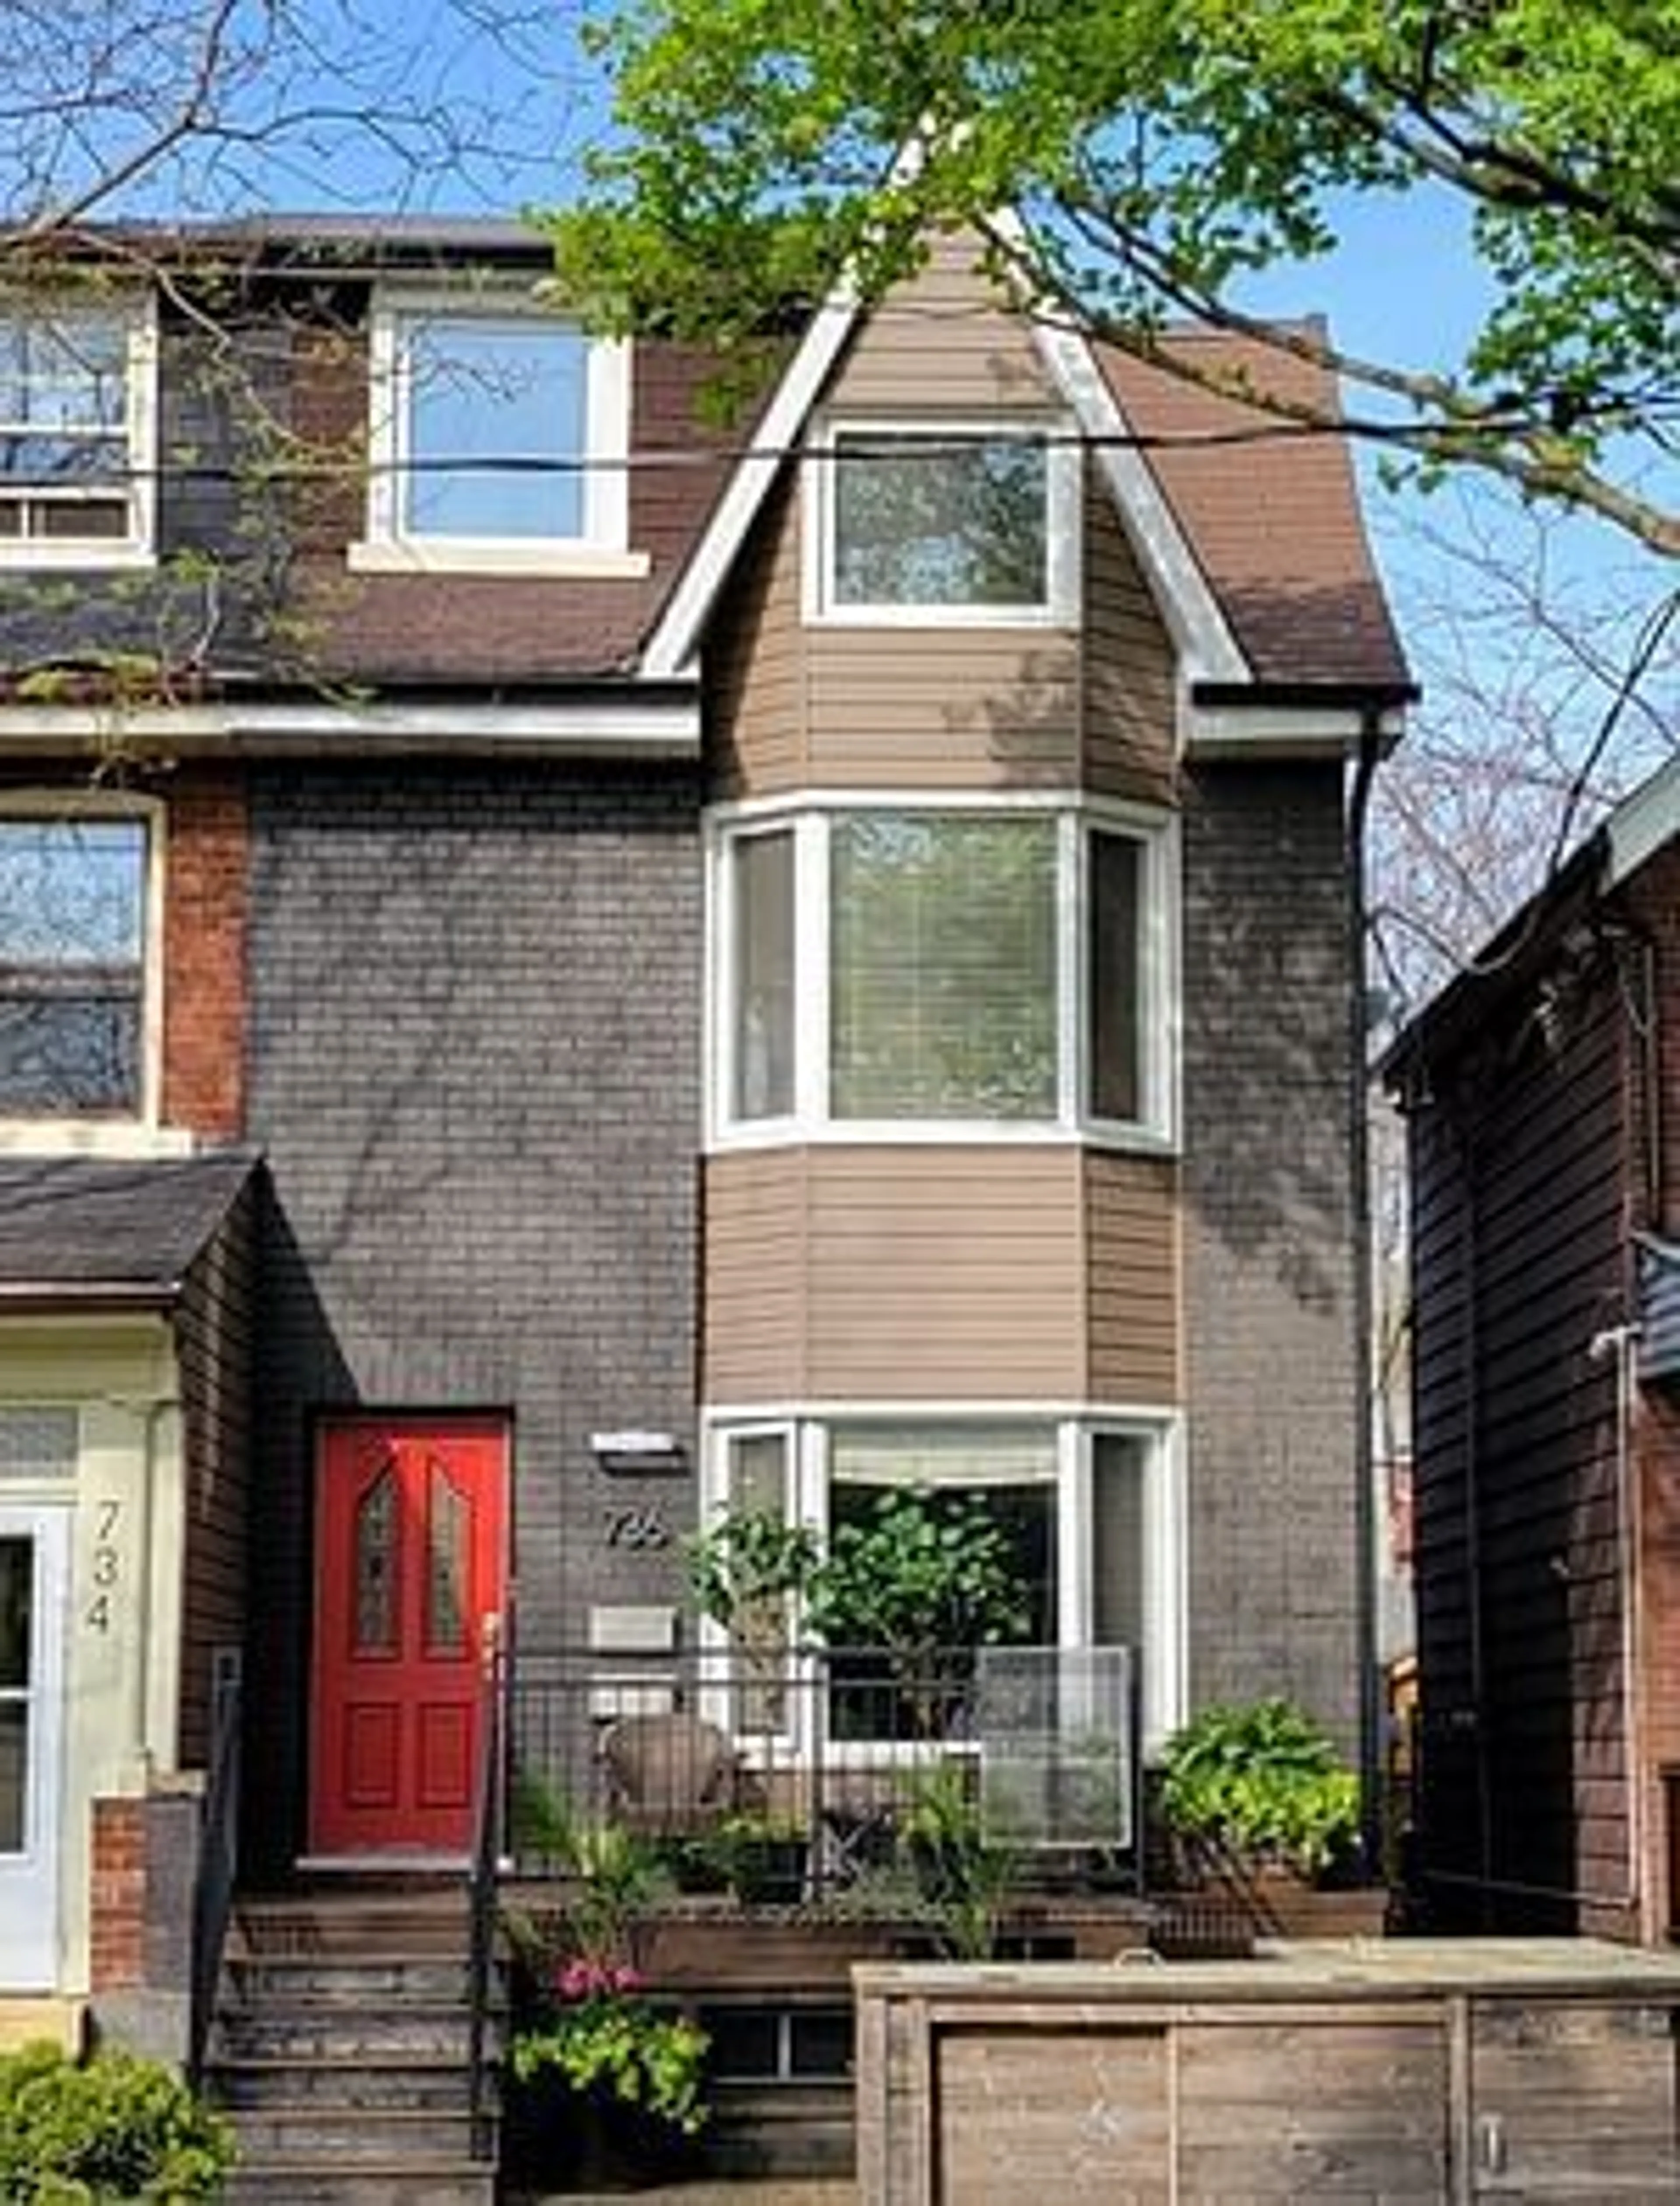 Home with brick exterior material for 736 Crawford St, Toronto Ontario M6G 3K3